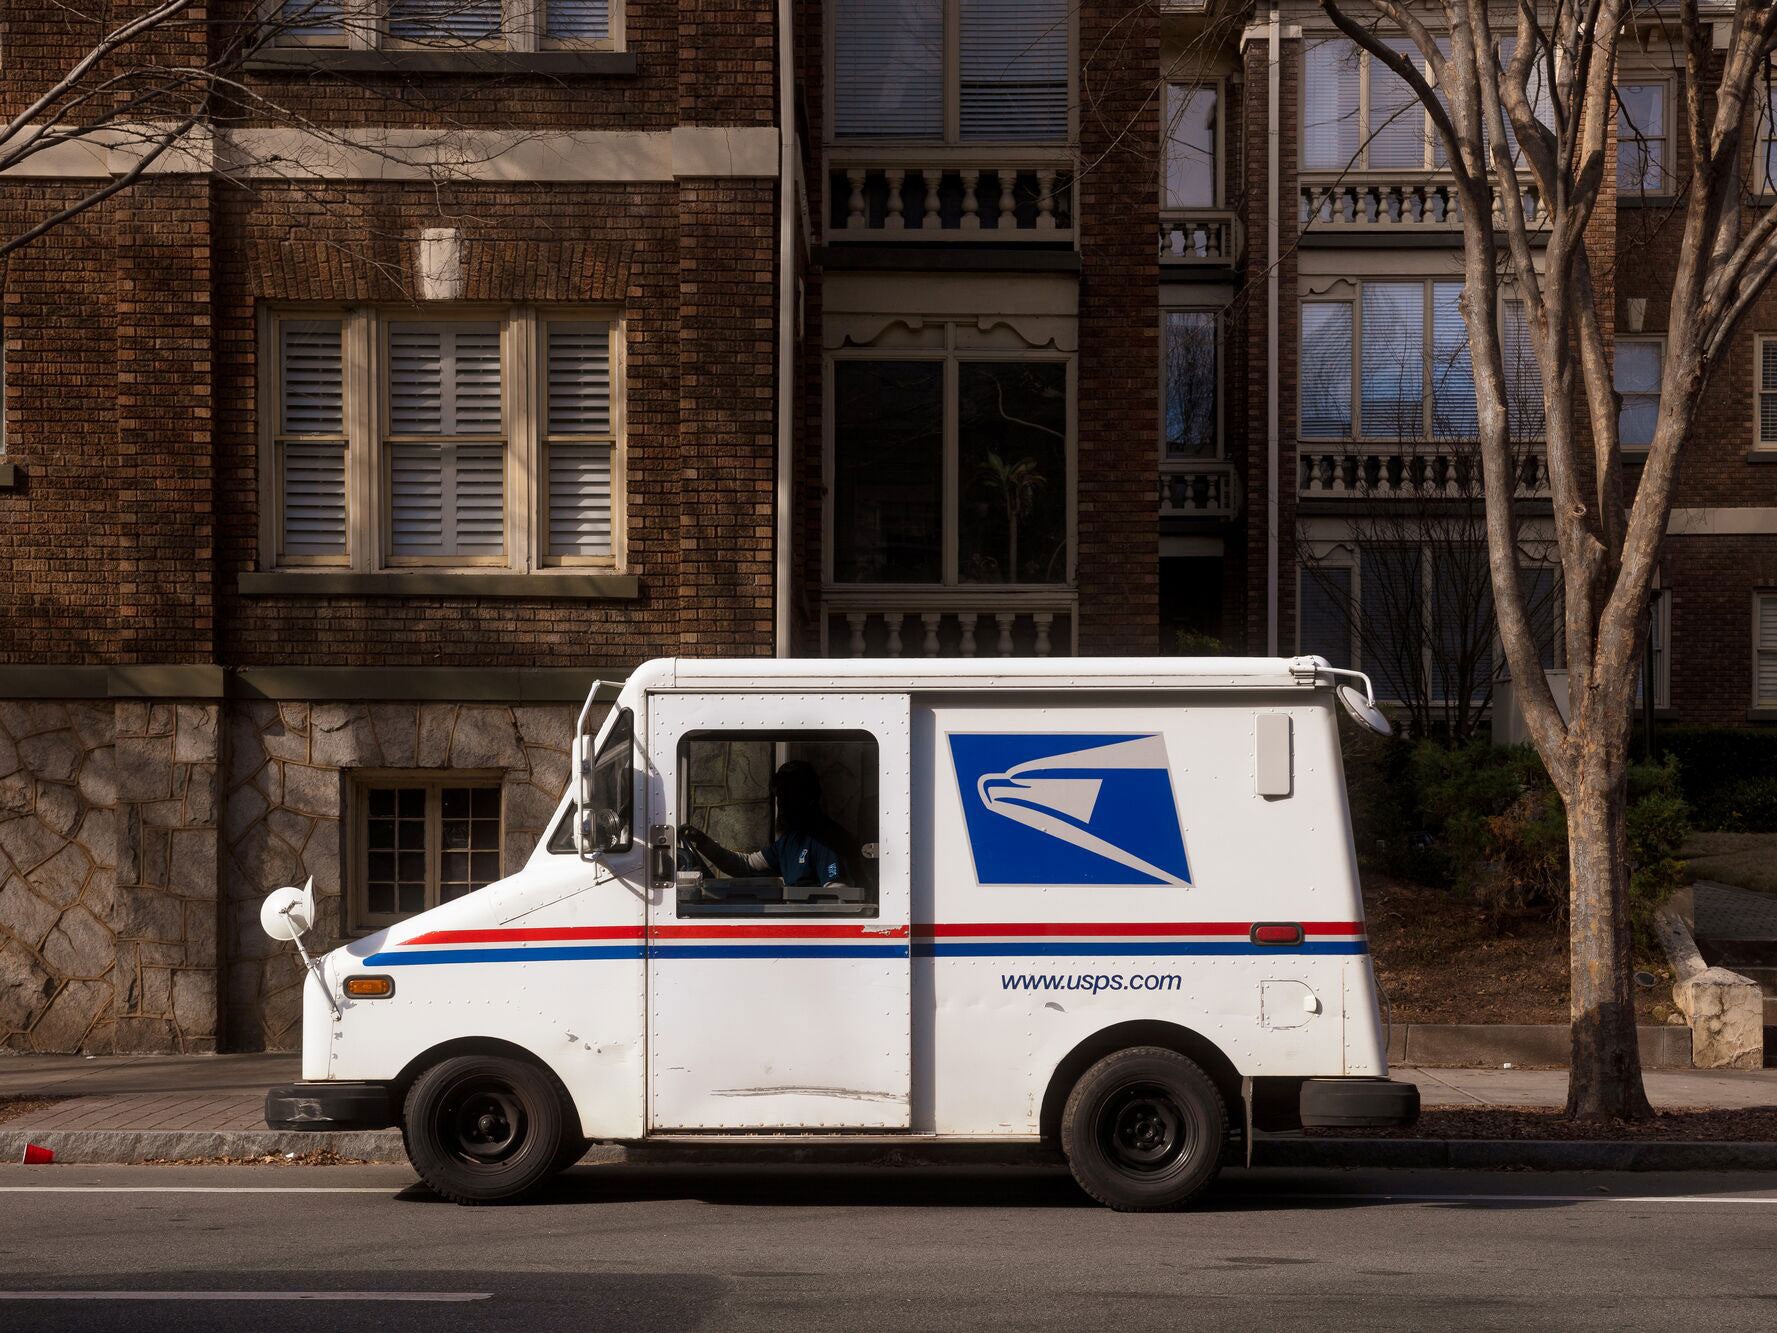 A USPS truck makes its rounds in midtown Atlanta. (Eric Saulsberry / Shutterstock)